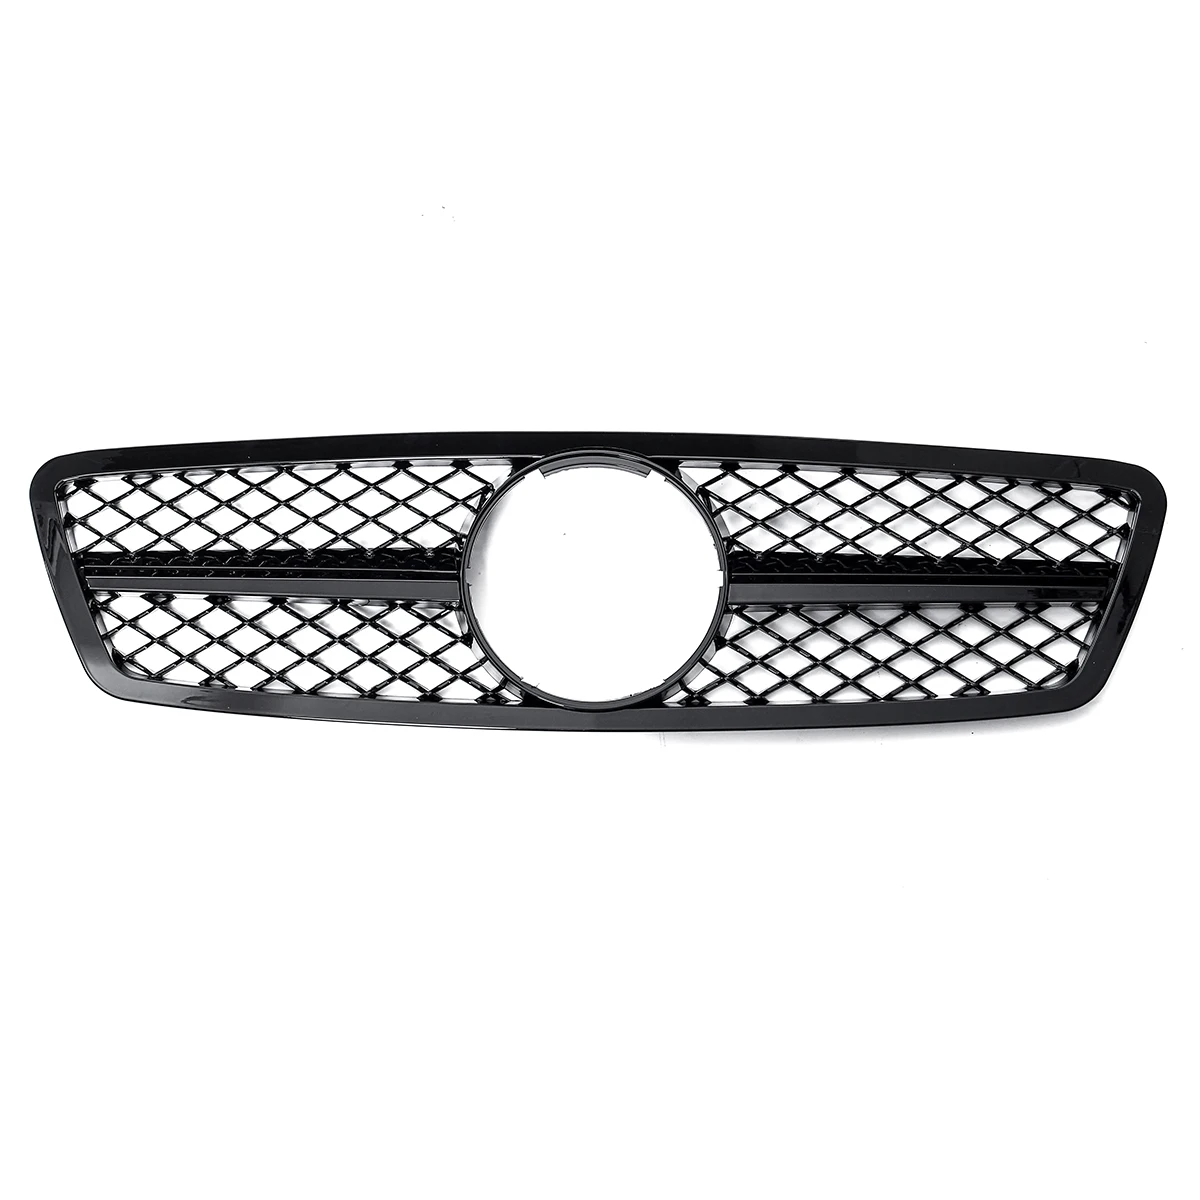 

Car Front Bumper Grille Grill Glossy Black for Mercedes-Benz C-Cl W203 C280 C320 C240 C200 C63 2000-2006